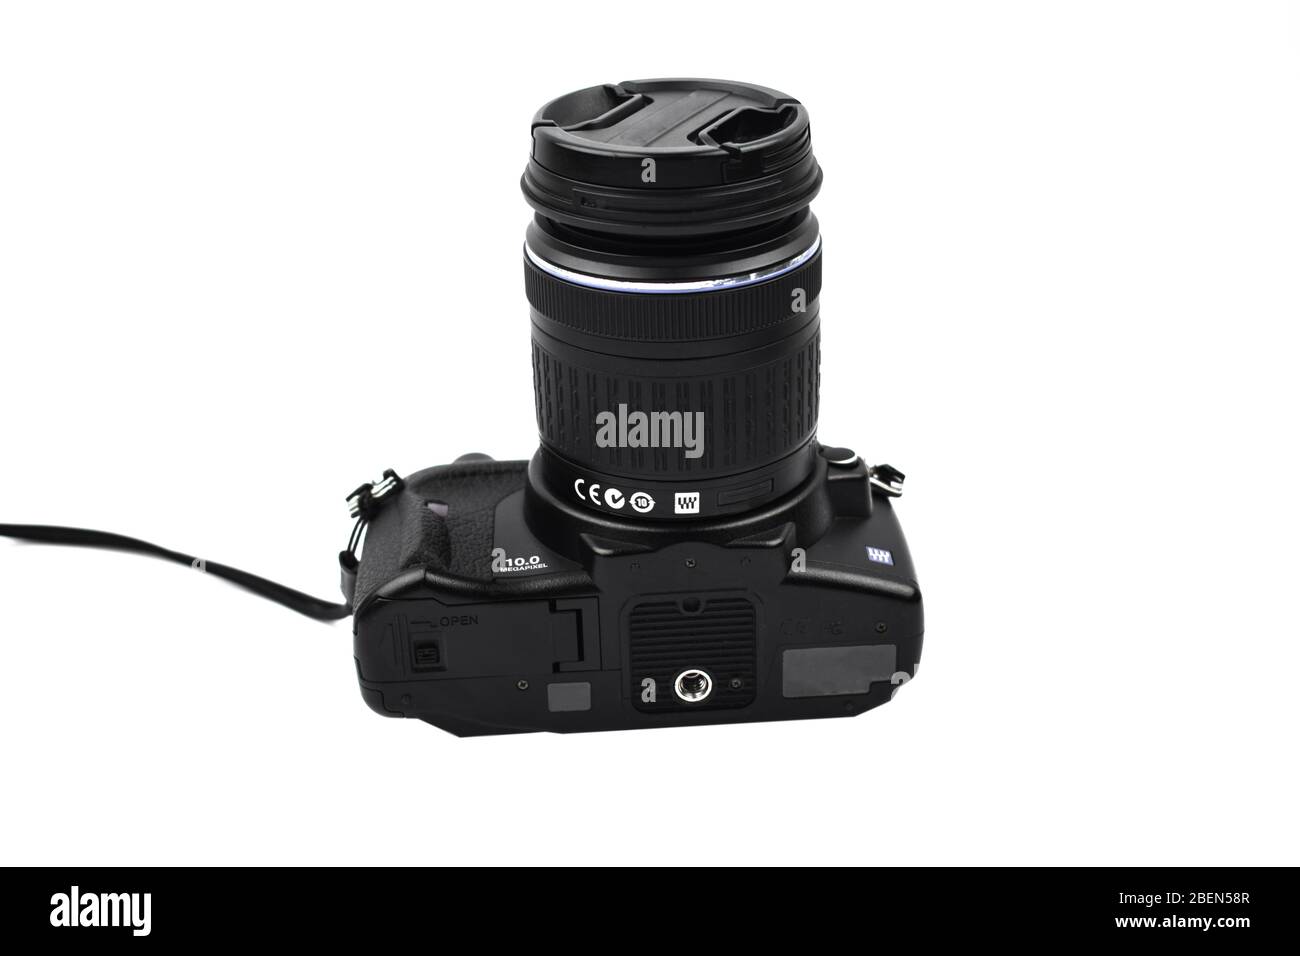 Photograph of a black colored camera with lens attached to it placed on an isolated white background Stock Photo